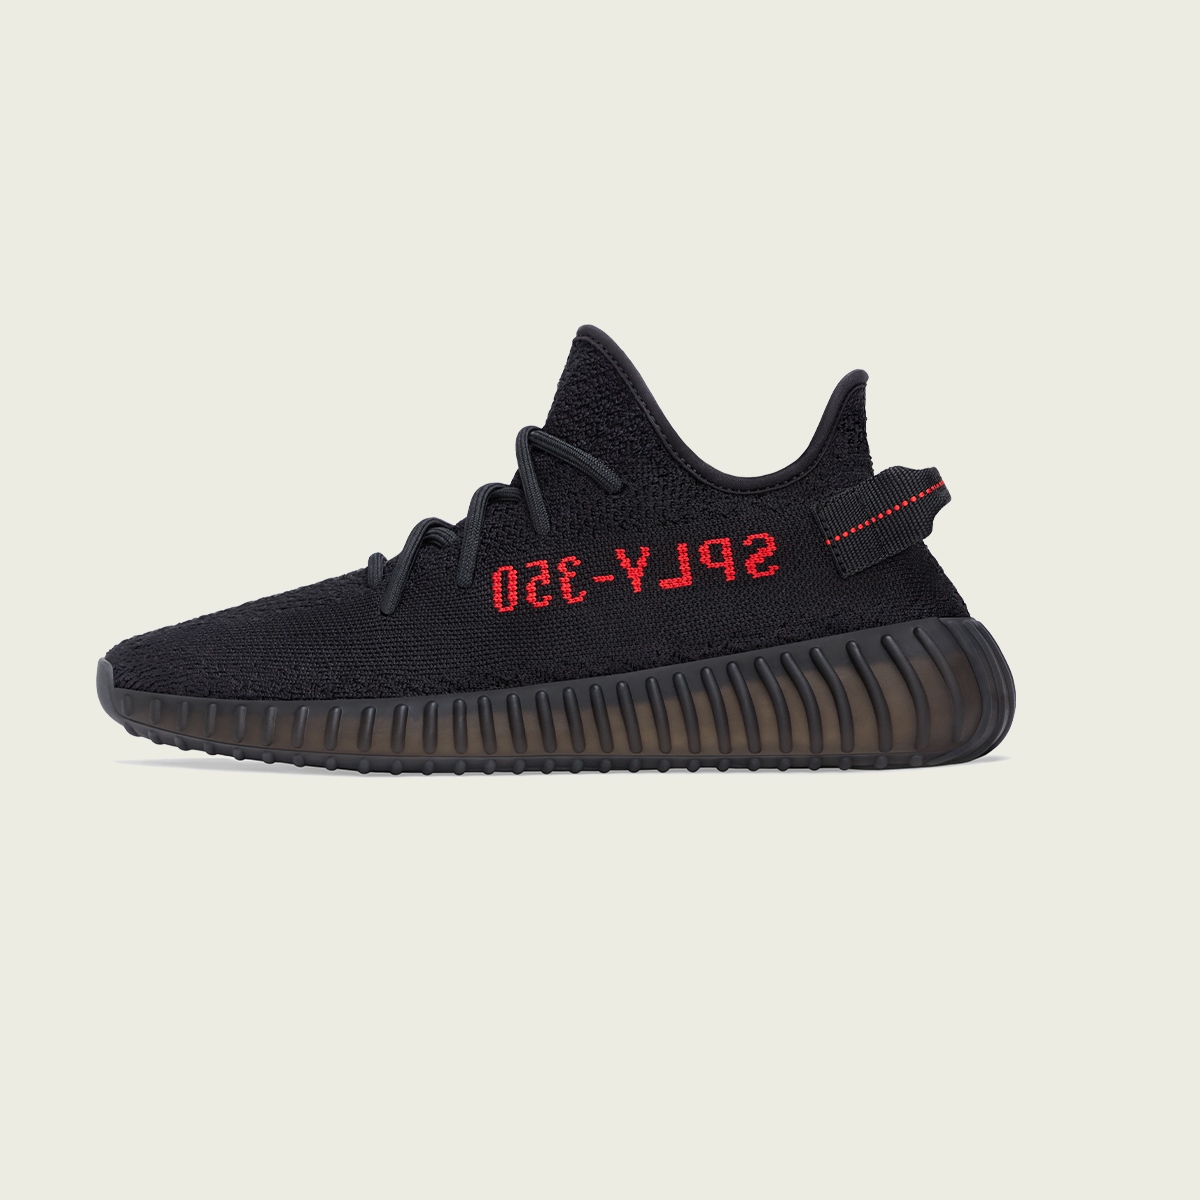 yeezy available in store